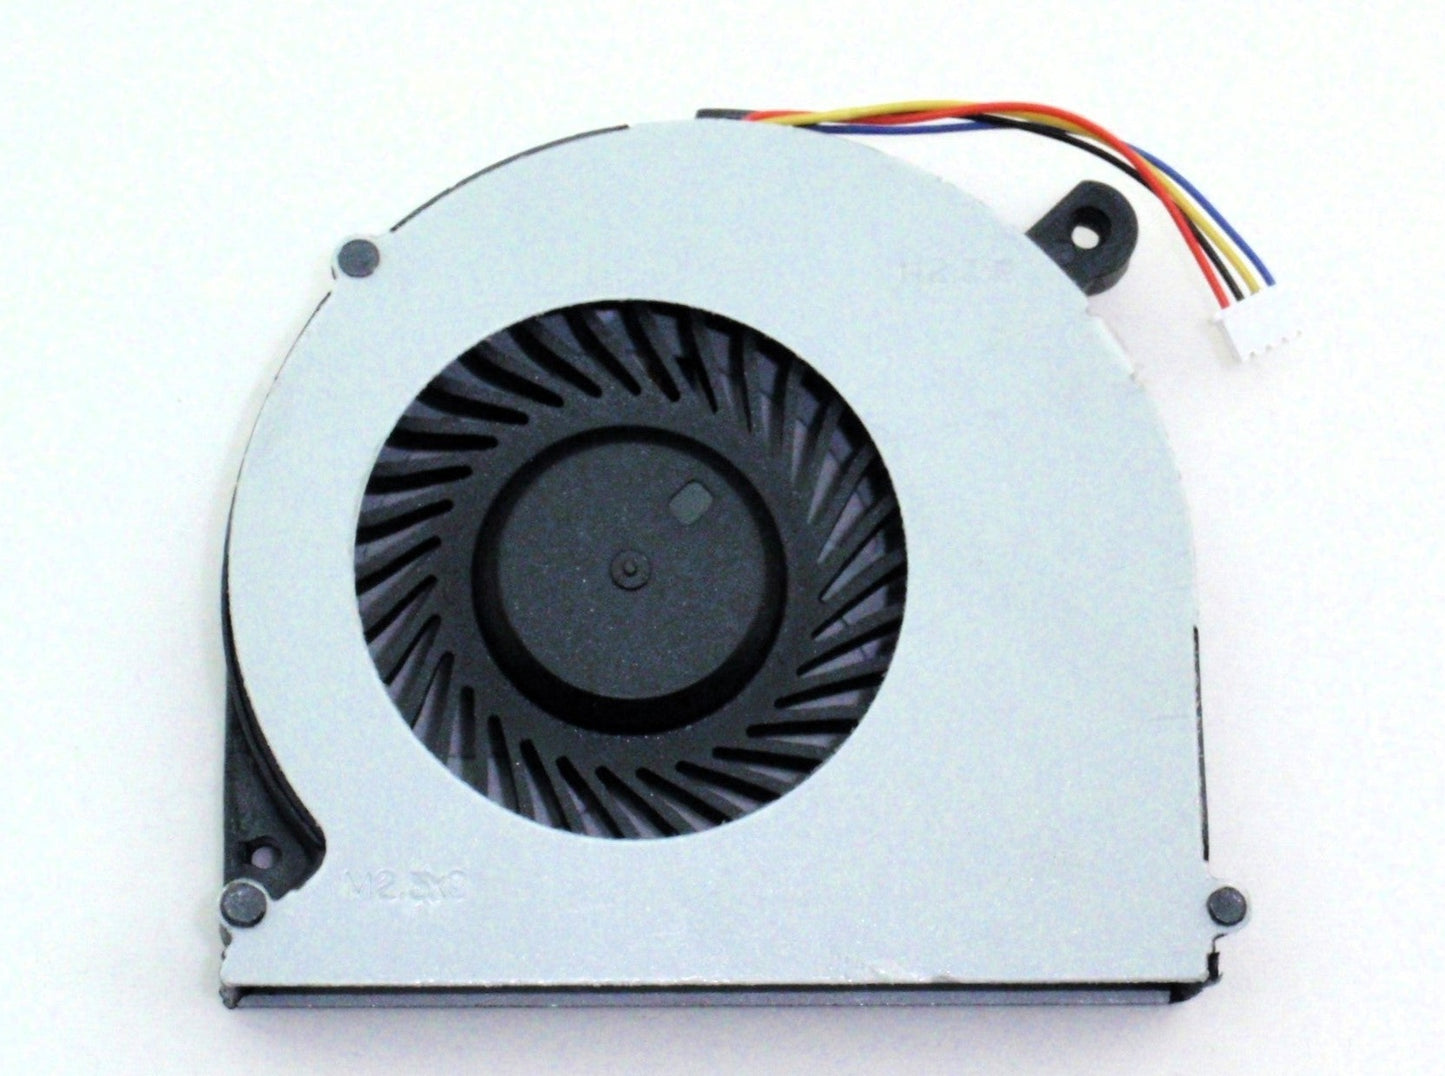 HP New CPU Cooling Thermal Fan ProBook 645 G1 645G1 6033B0034402 DFS501105PR0T-FHKP 849993-001